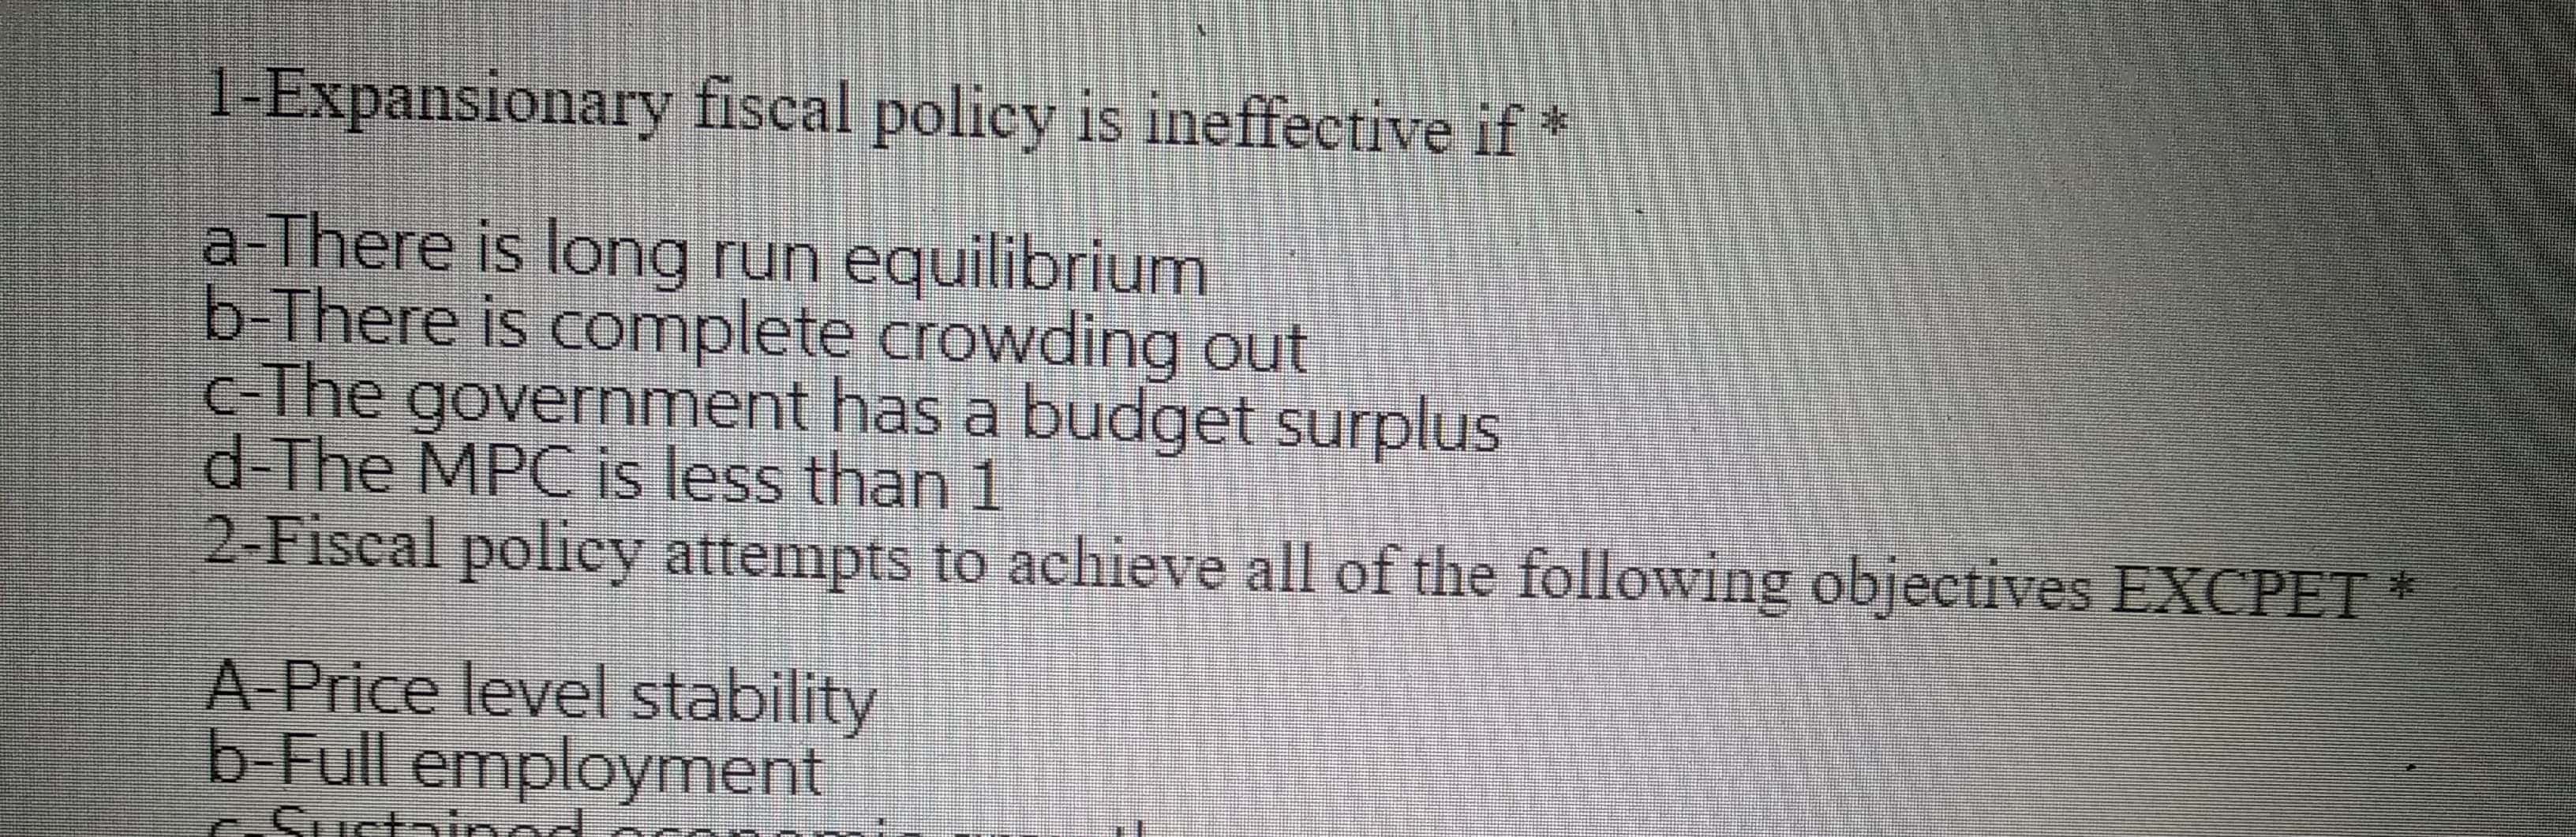 1-Expansionary fiscal policy is ineffective if*
a-There is long run equilibrium
b-There is complete crowding out
c-The government has a budget surplus
d-The MPC is less than 1
Fisca
